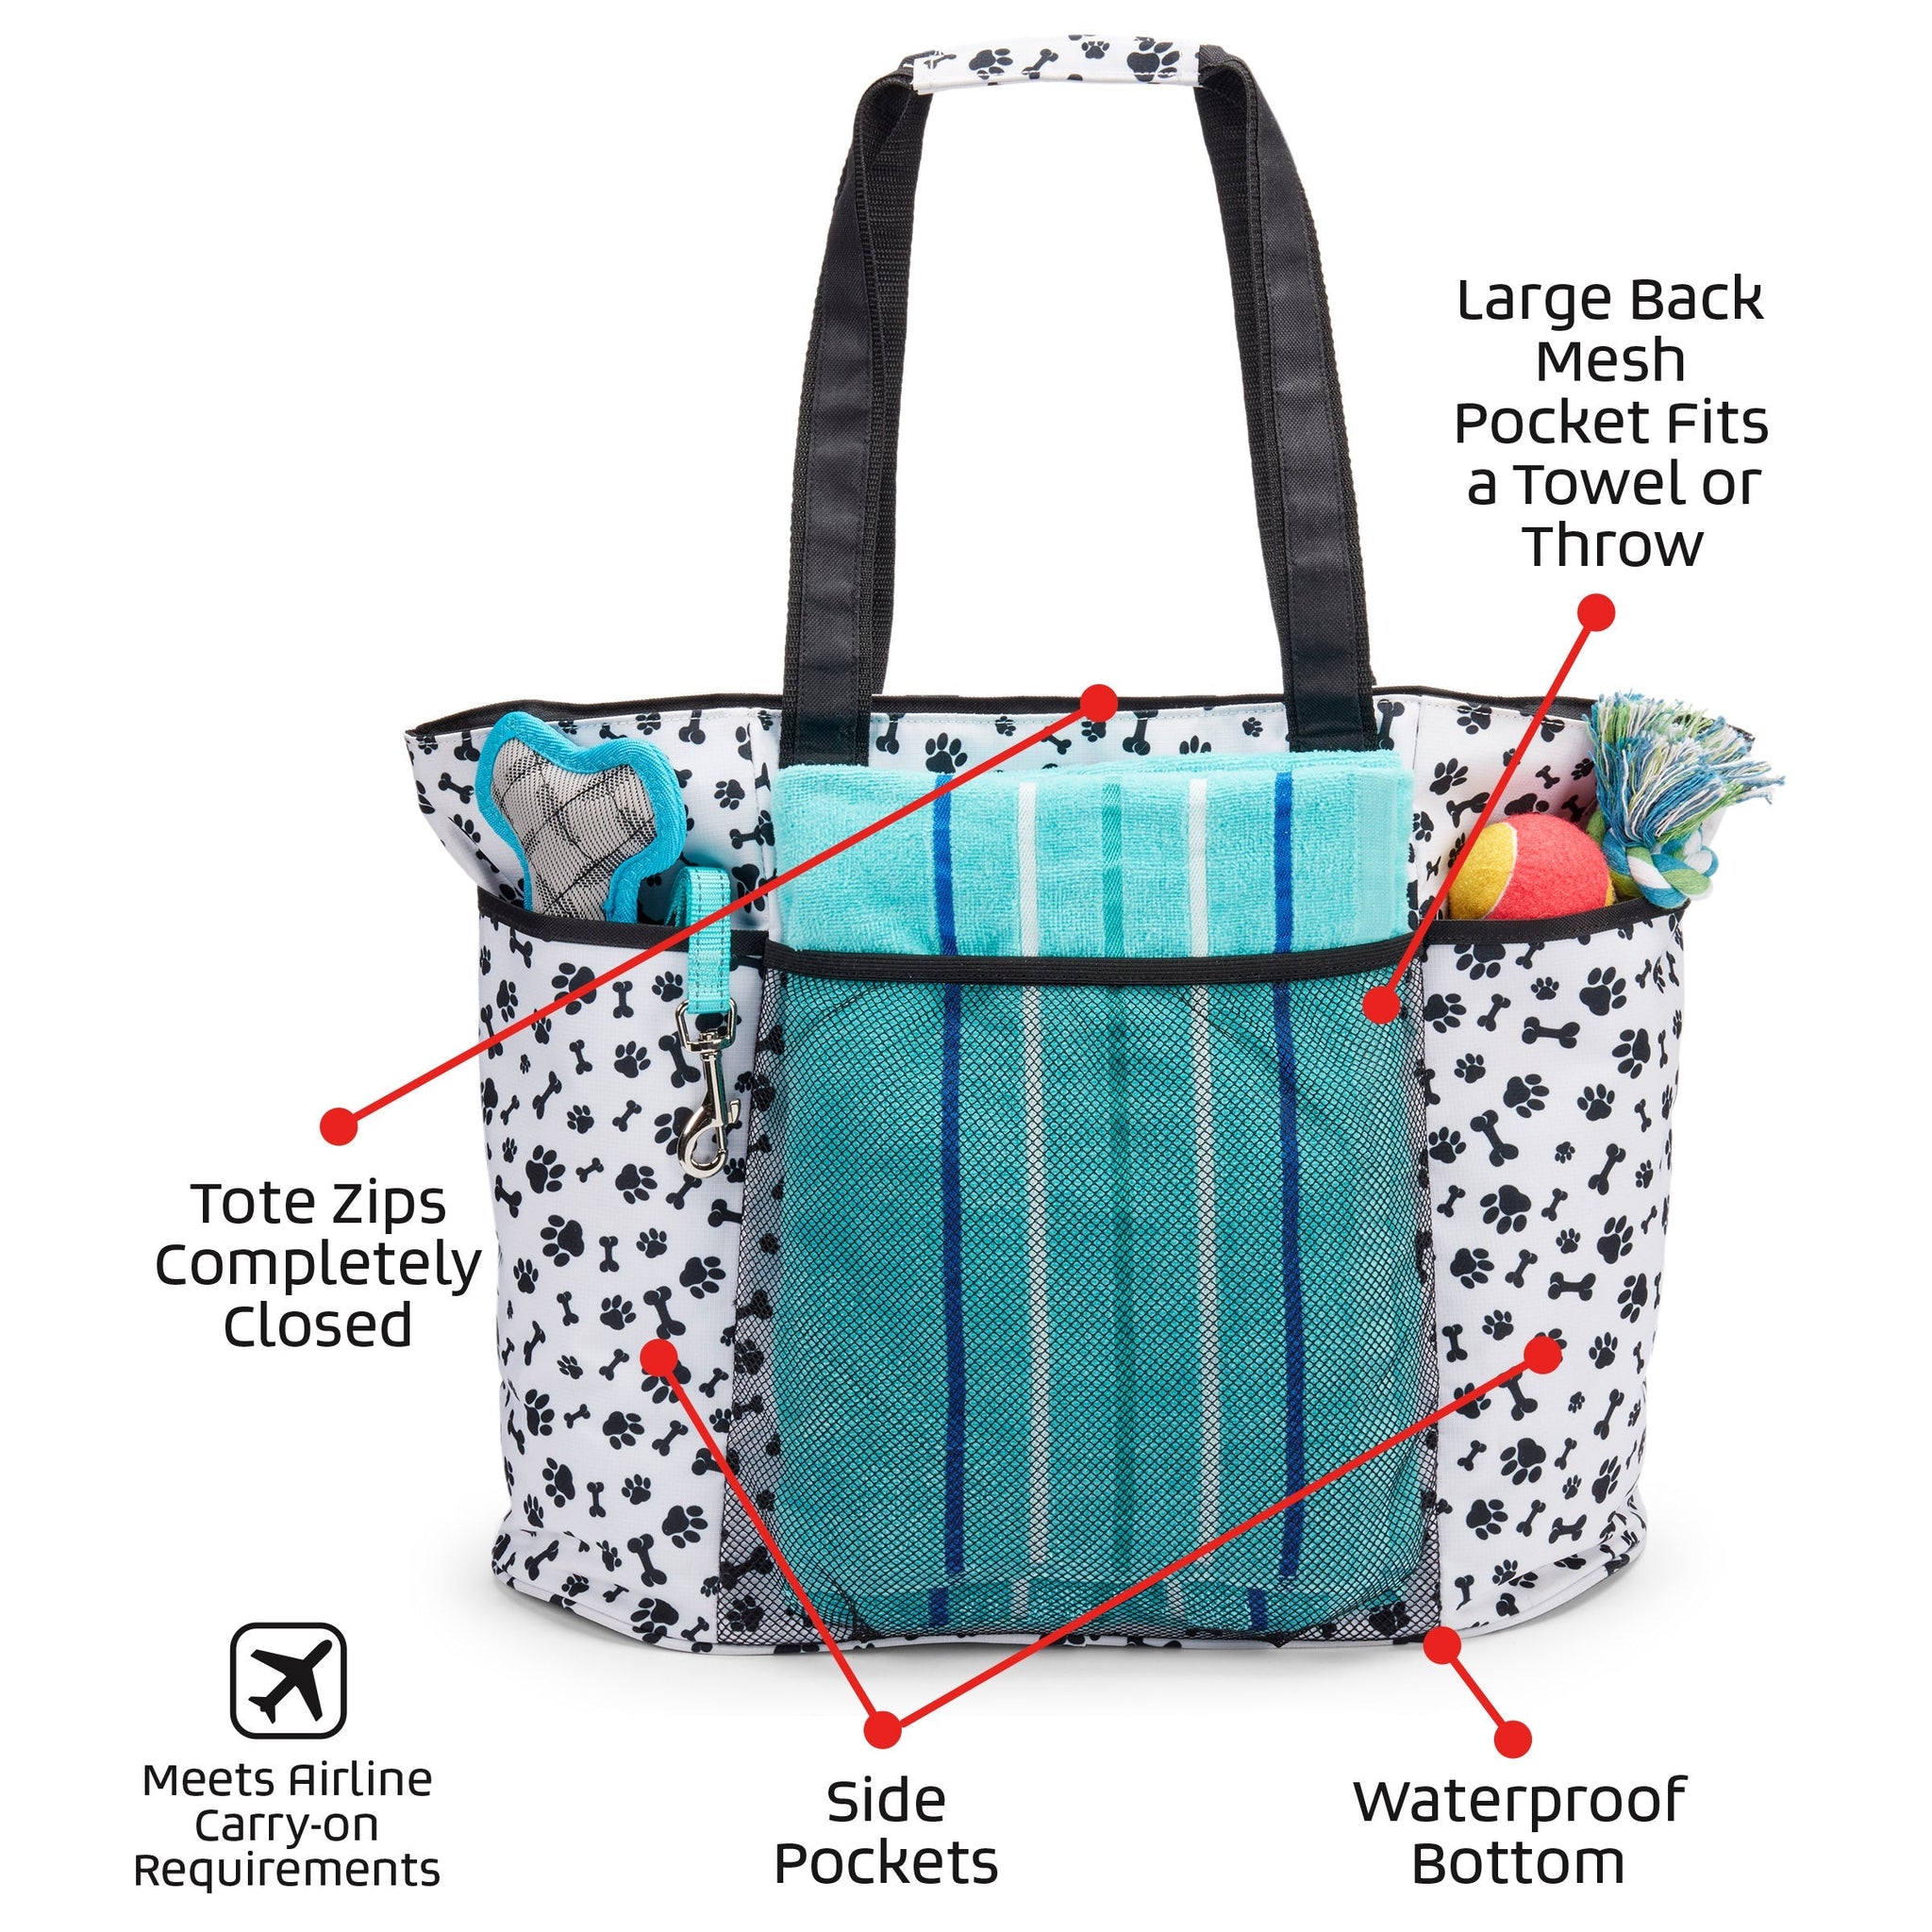 Explaining each part of dog tote bag and its functionality